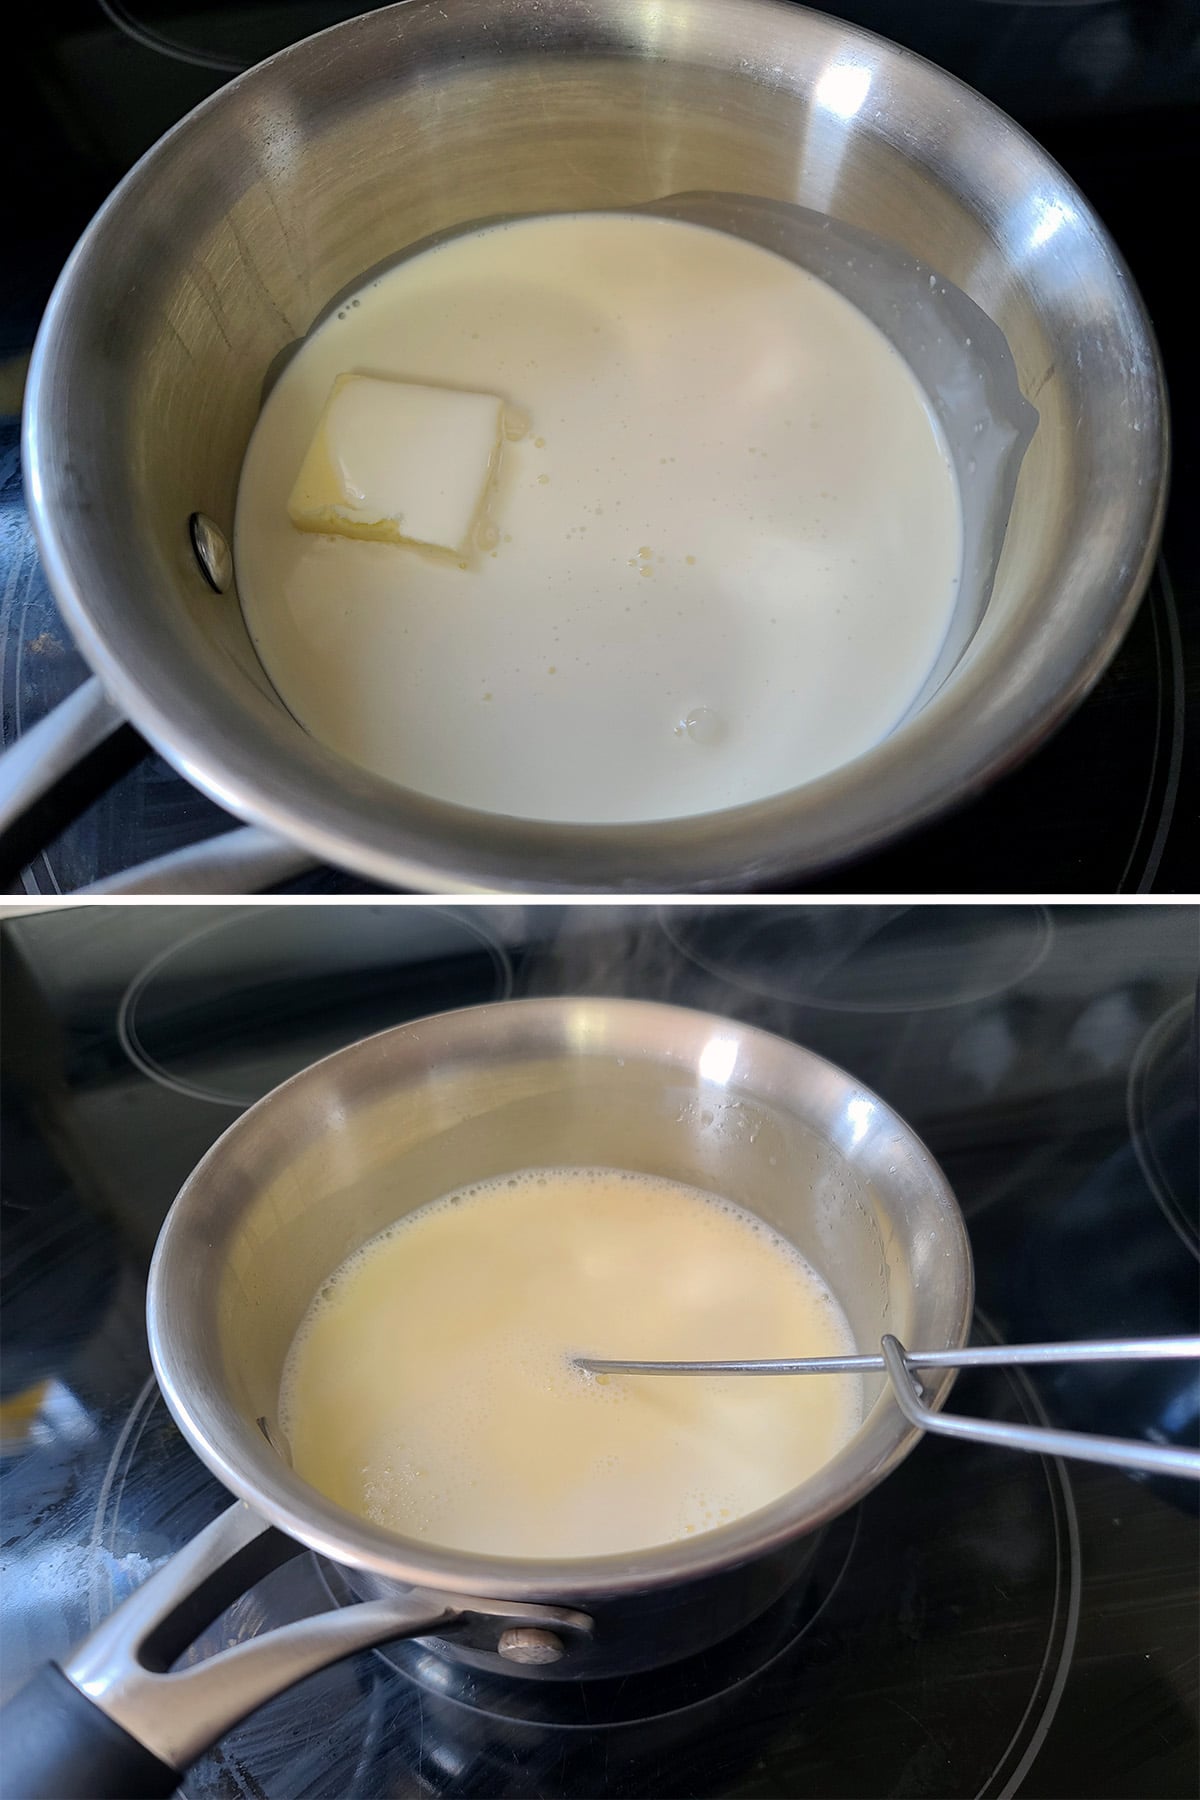 Butter and cream being heated in a small pot.